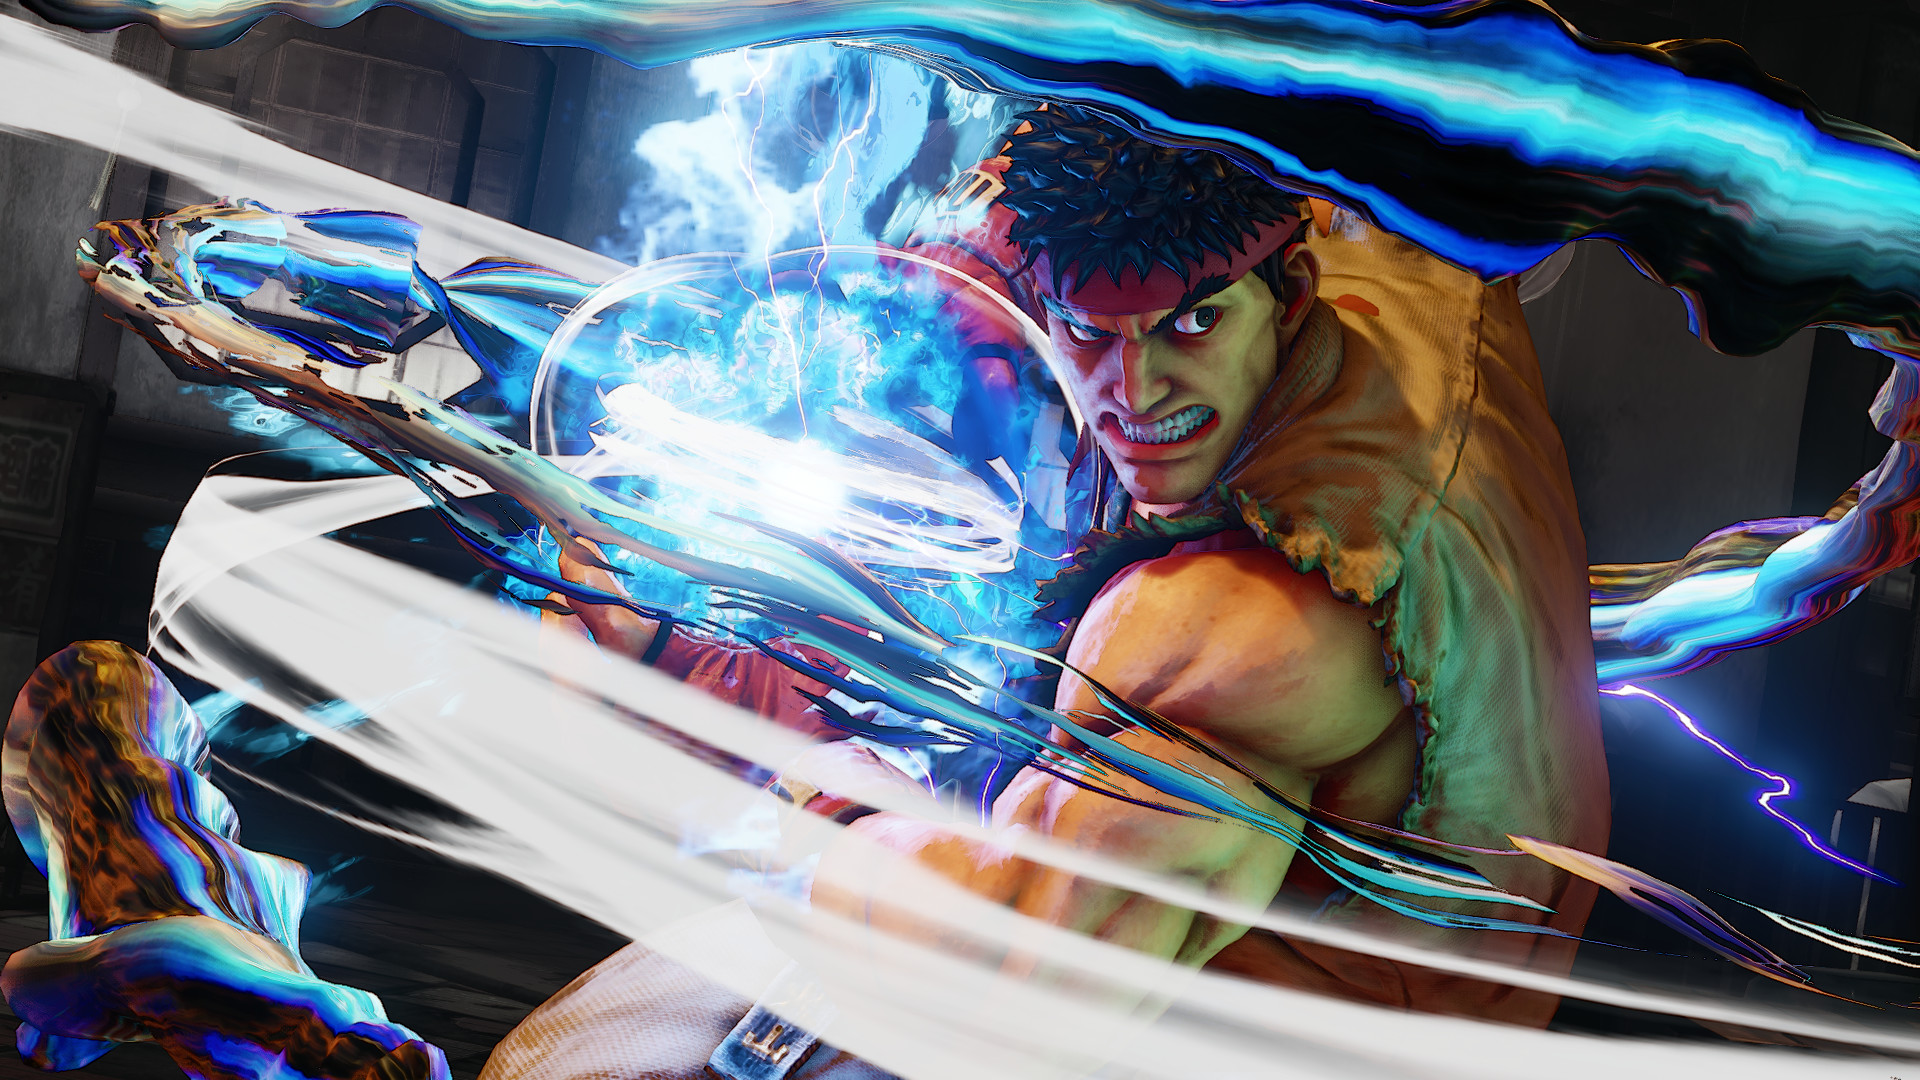 Street Fighter V: Top 5 BEST Characters To Play! (2022) 